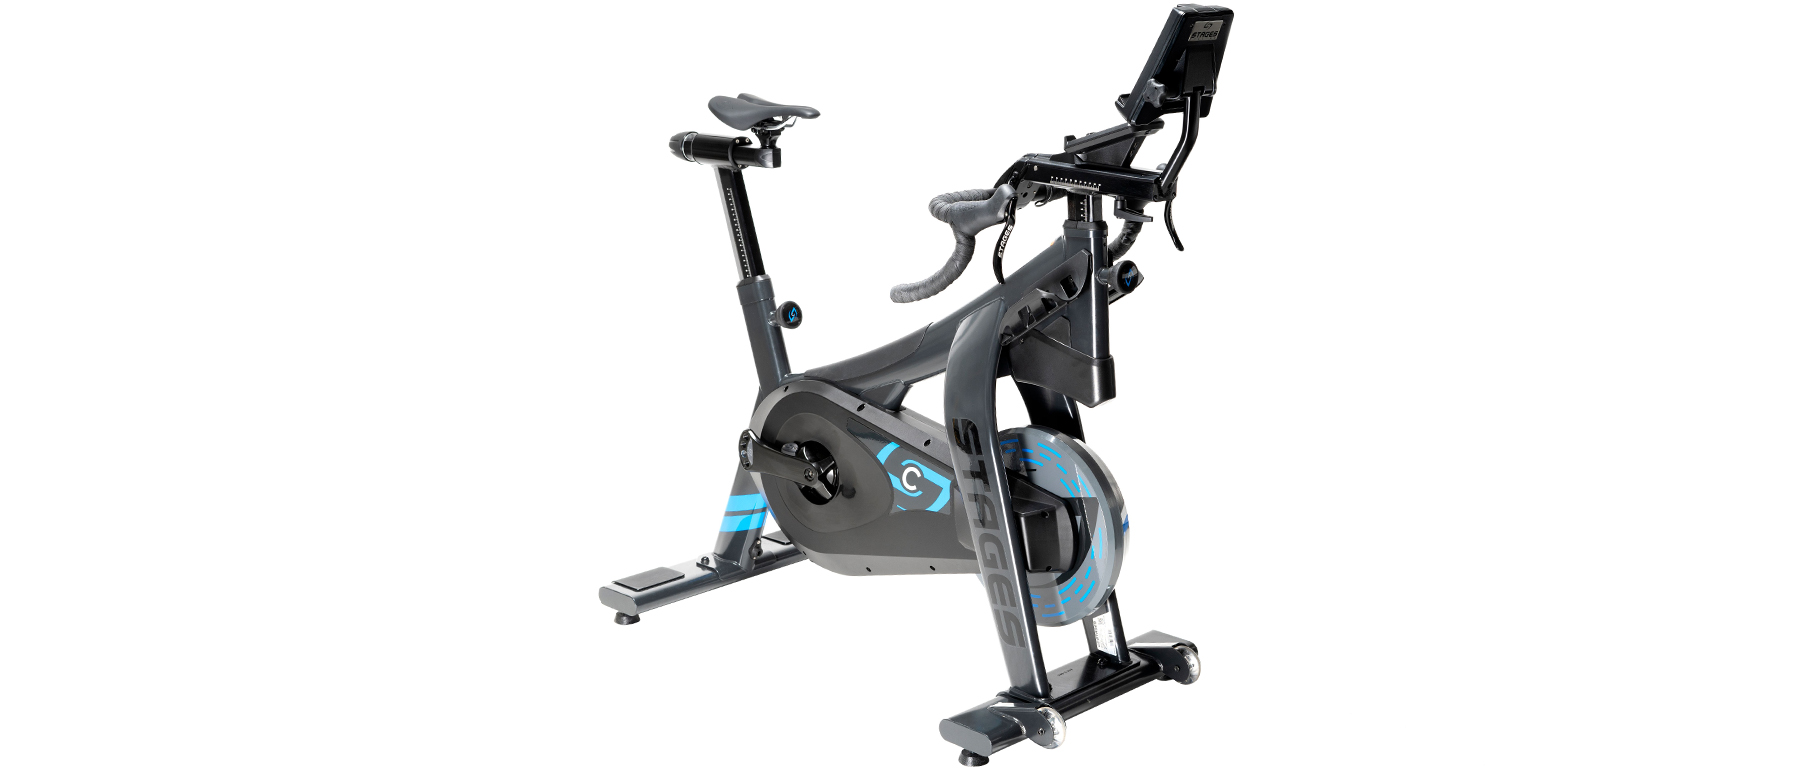 Stages Cycling Home Trainer SB20 Smart Bike - New